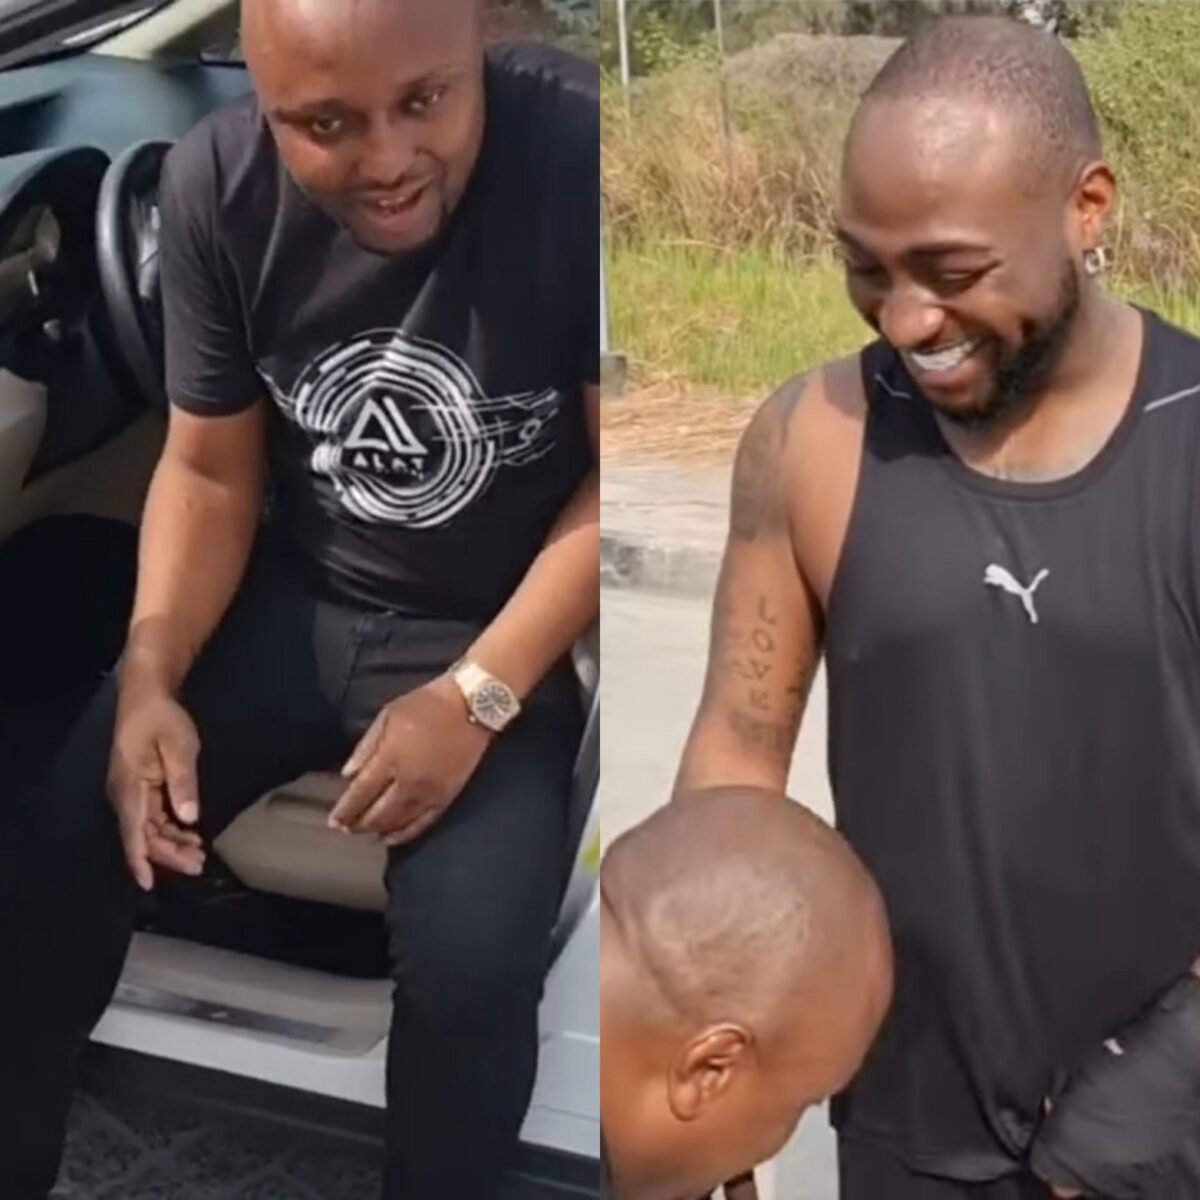 Davido Expresses Joy Ahead of Reunion with Israel - “Can’t wait to see Israel”